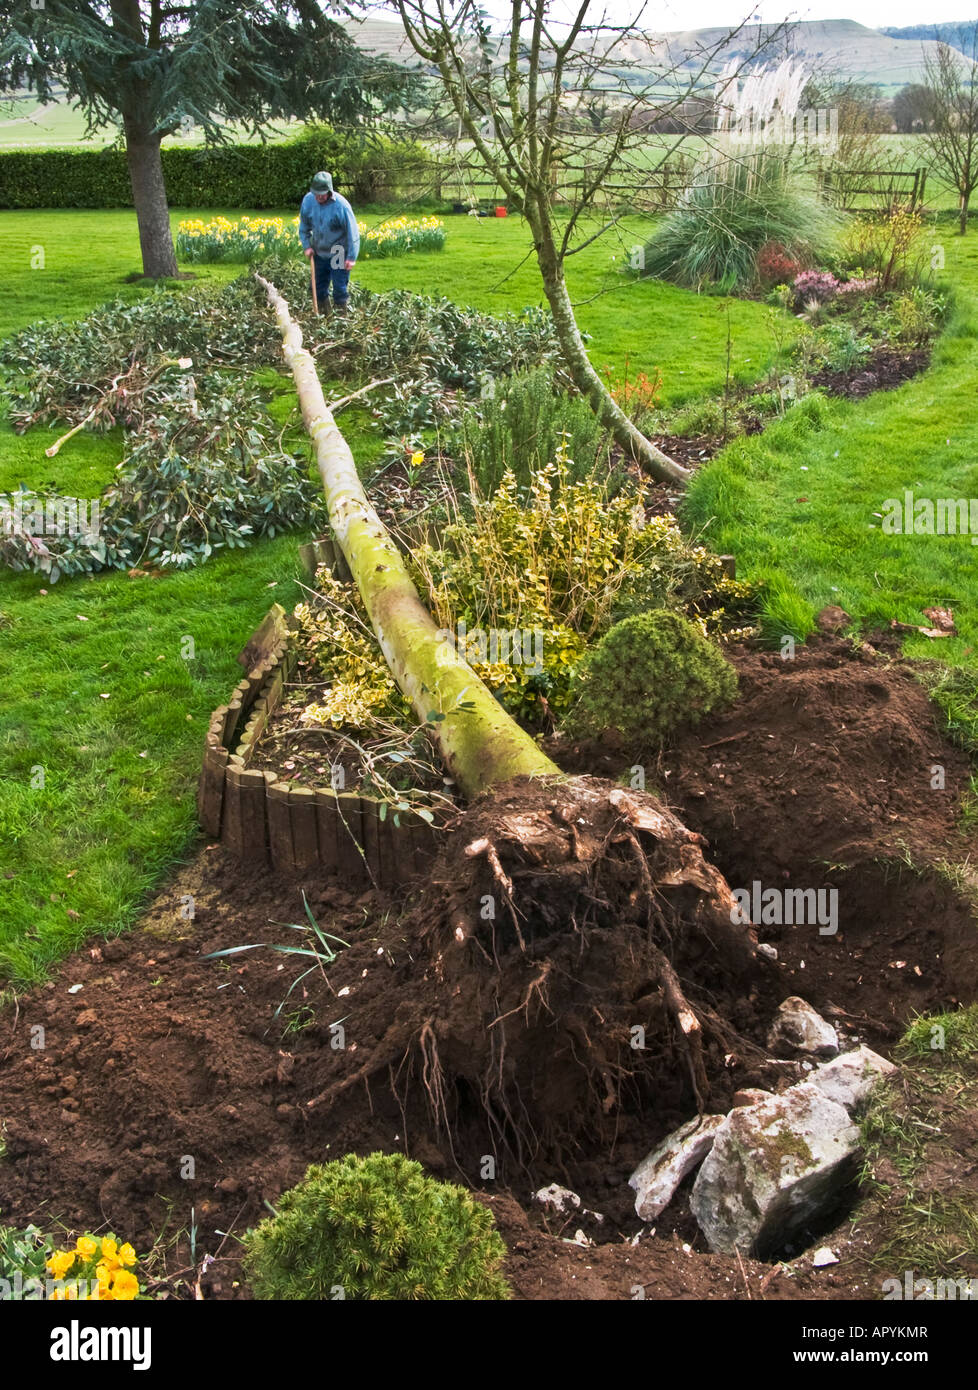 Eucalyptus tree felled after storm damage in a garden Stock Photo